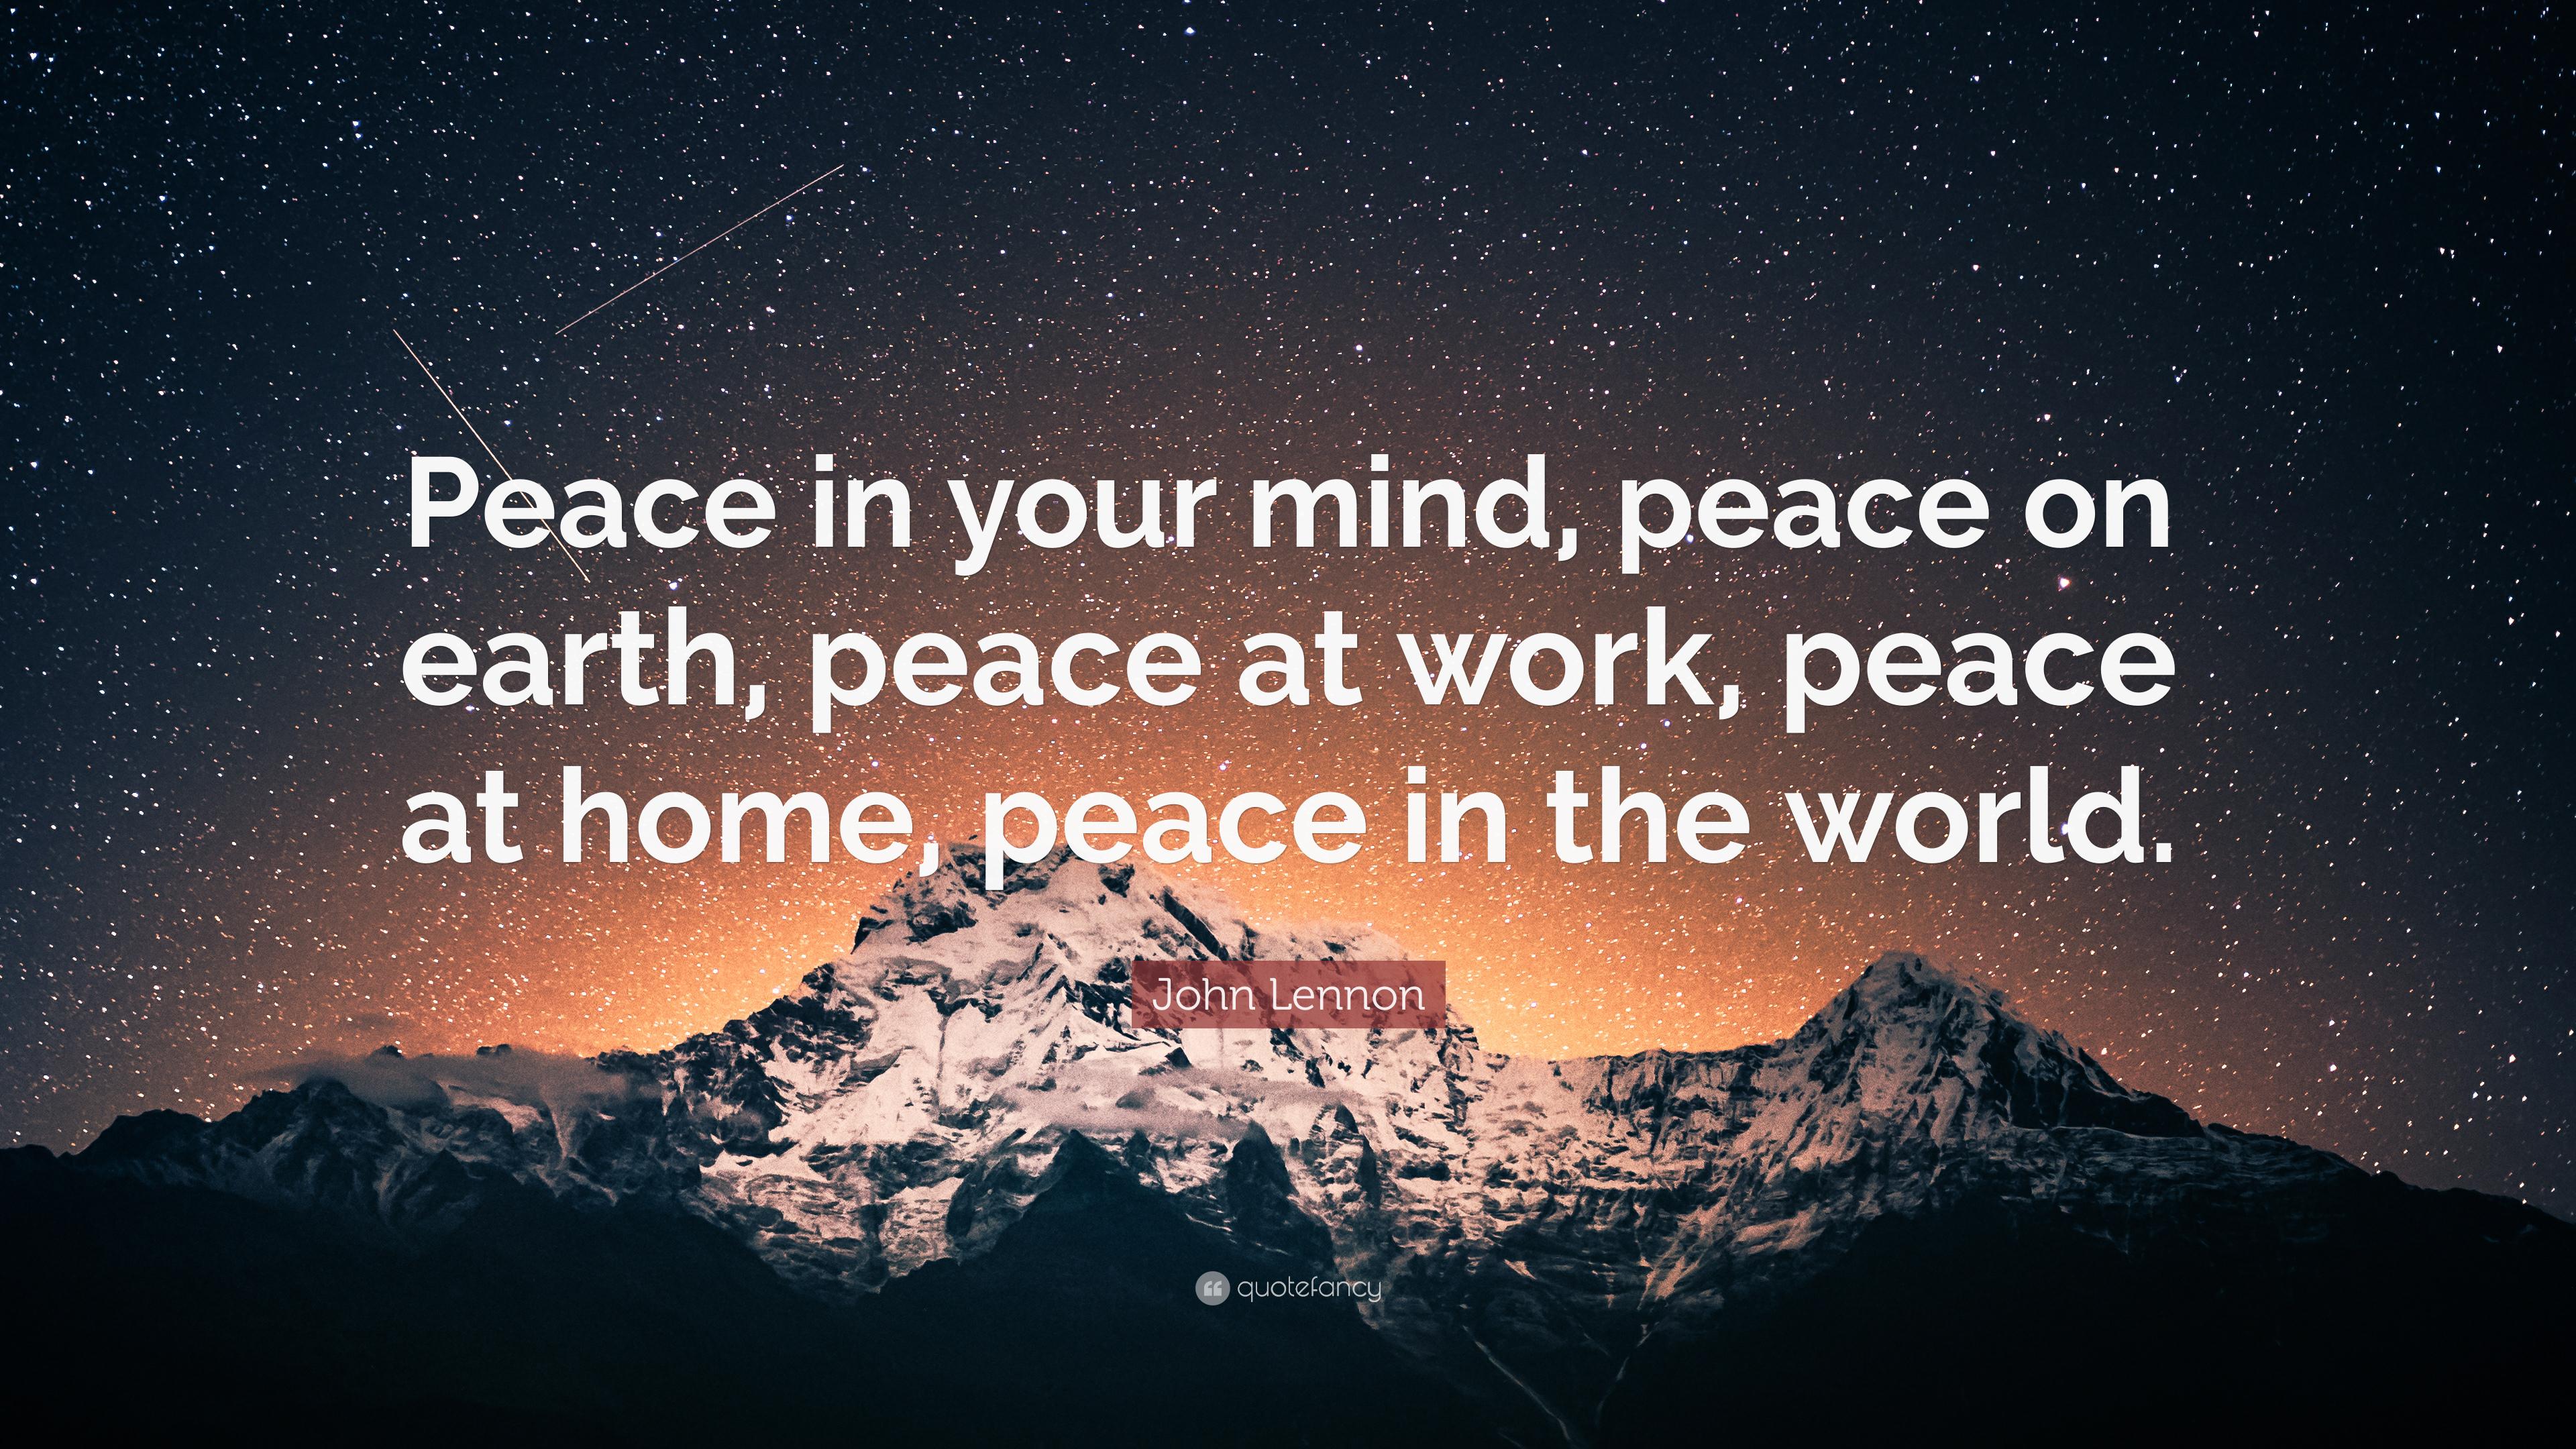 John Lennon Quote: “Peace in your mind, peace on earth